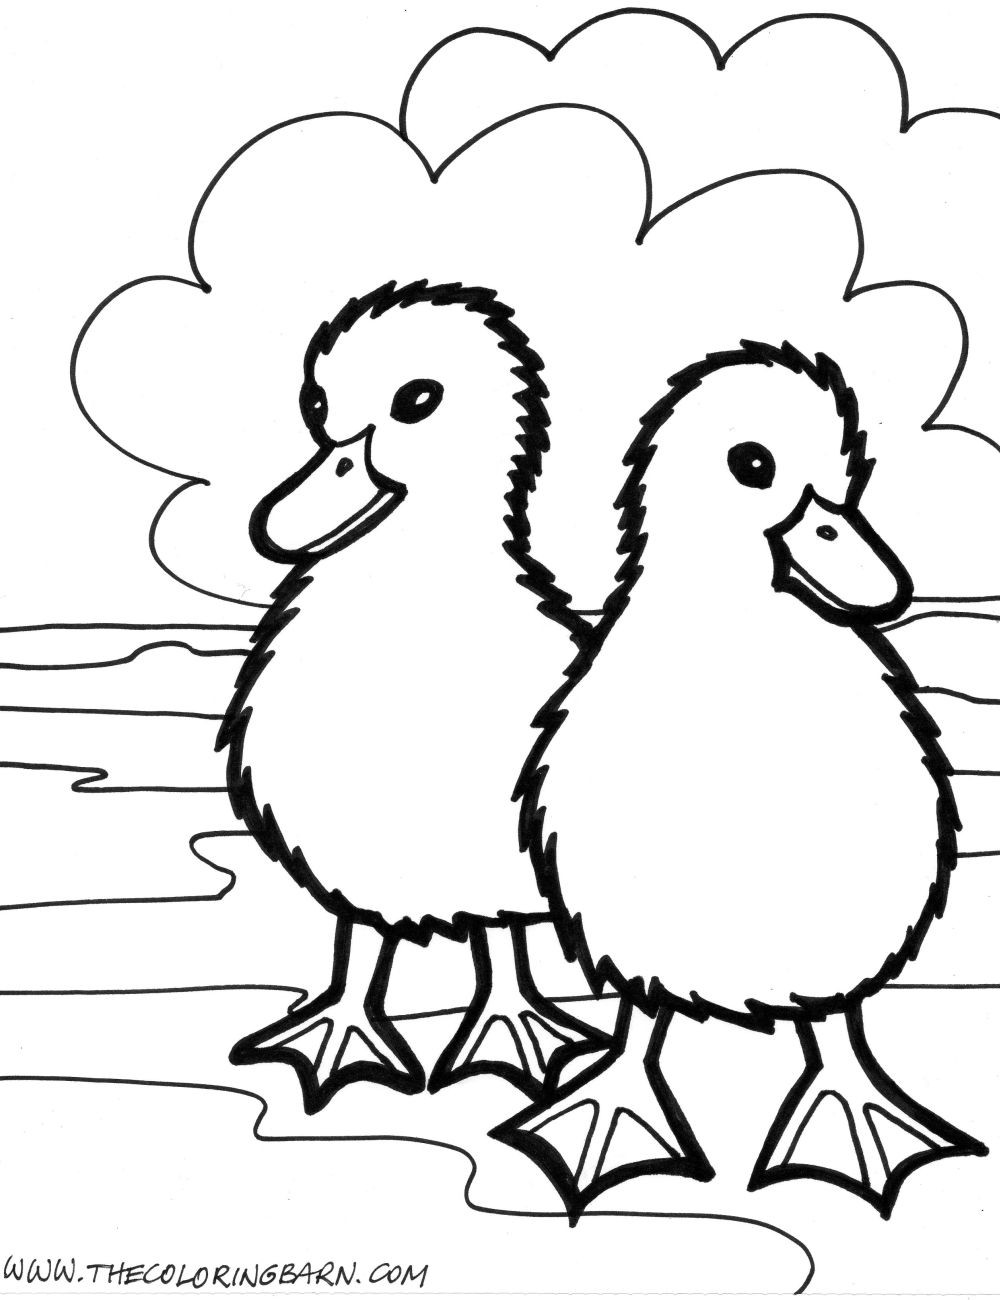 Coloring Pages For Kids Animals
 Free Printable Coloring Pages for Kids Animals